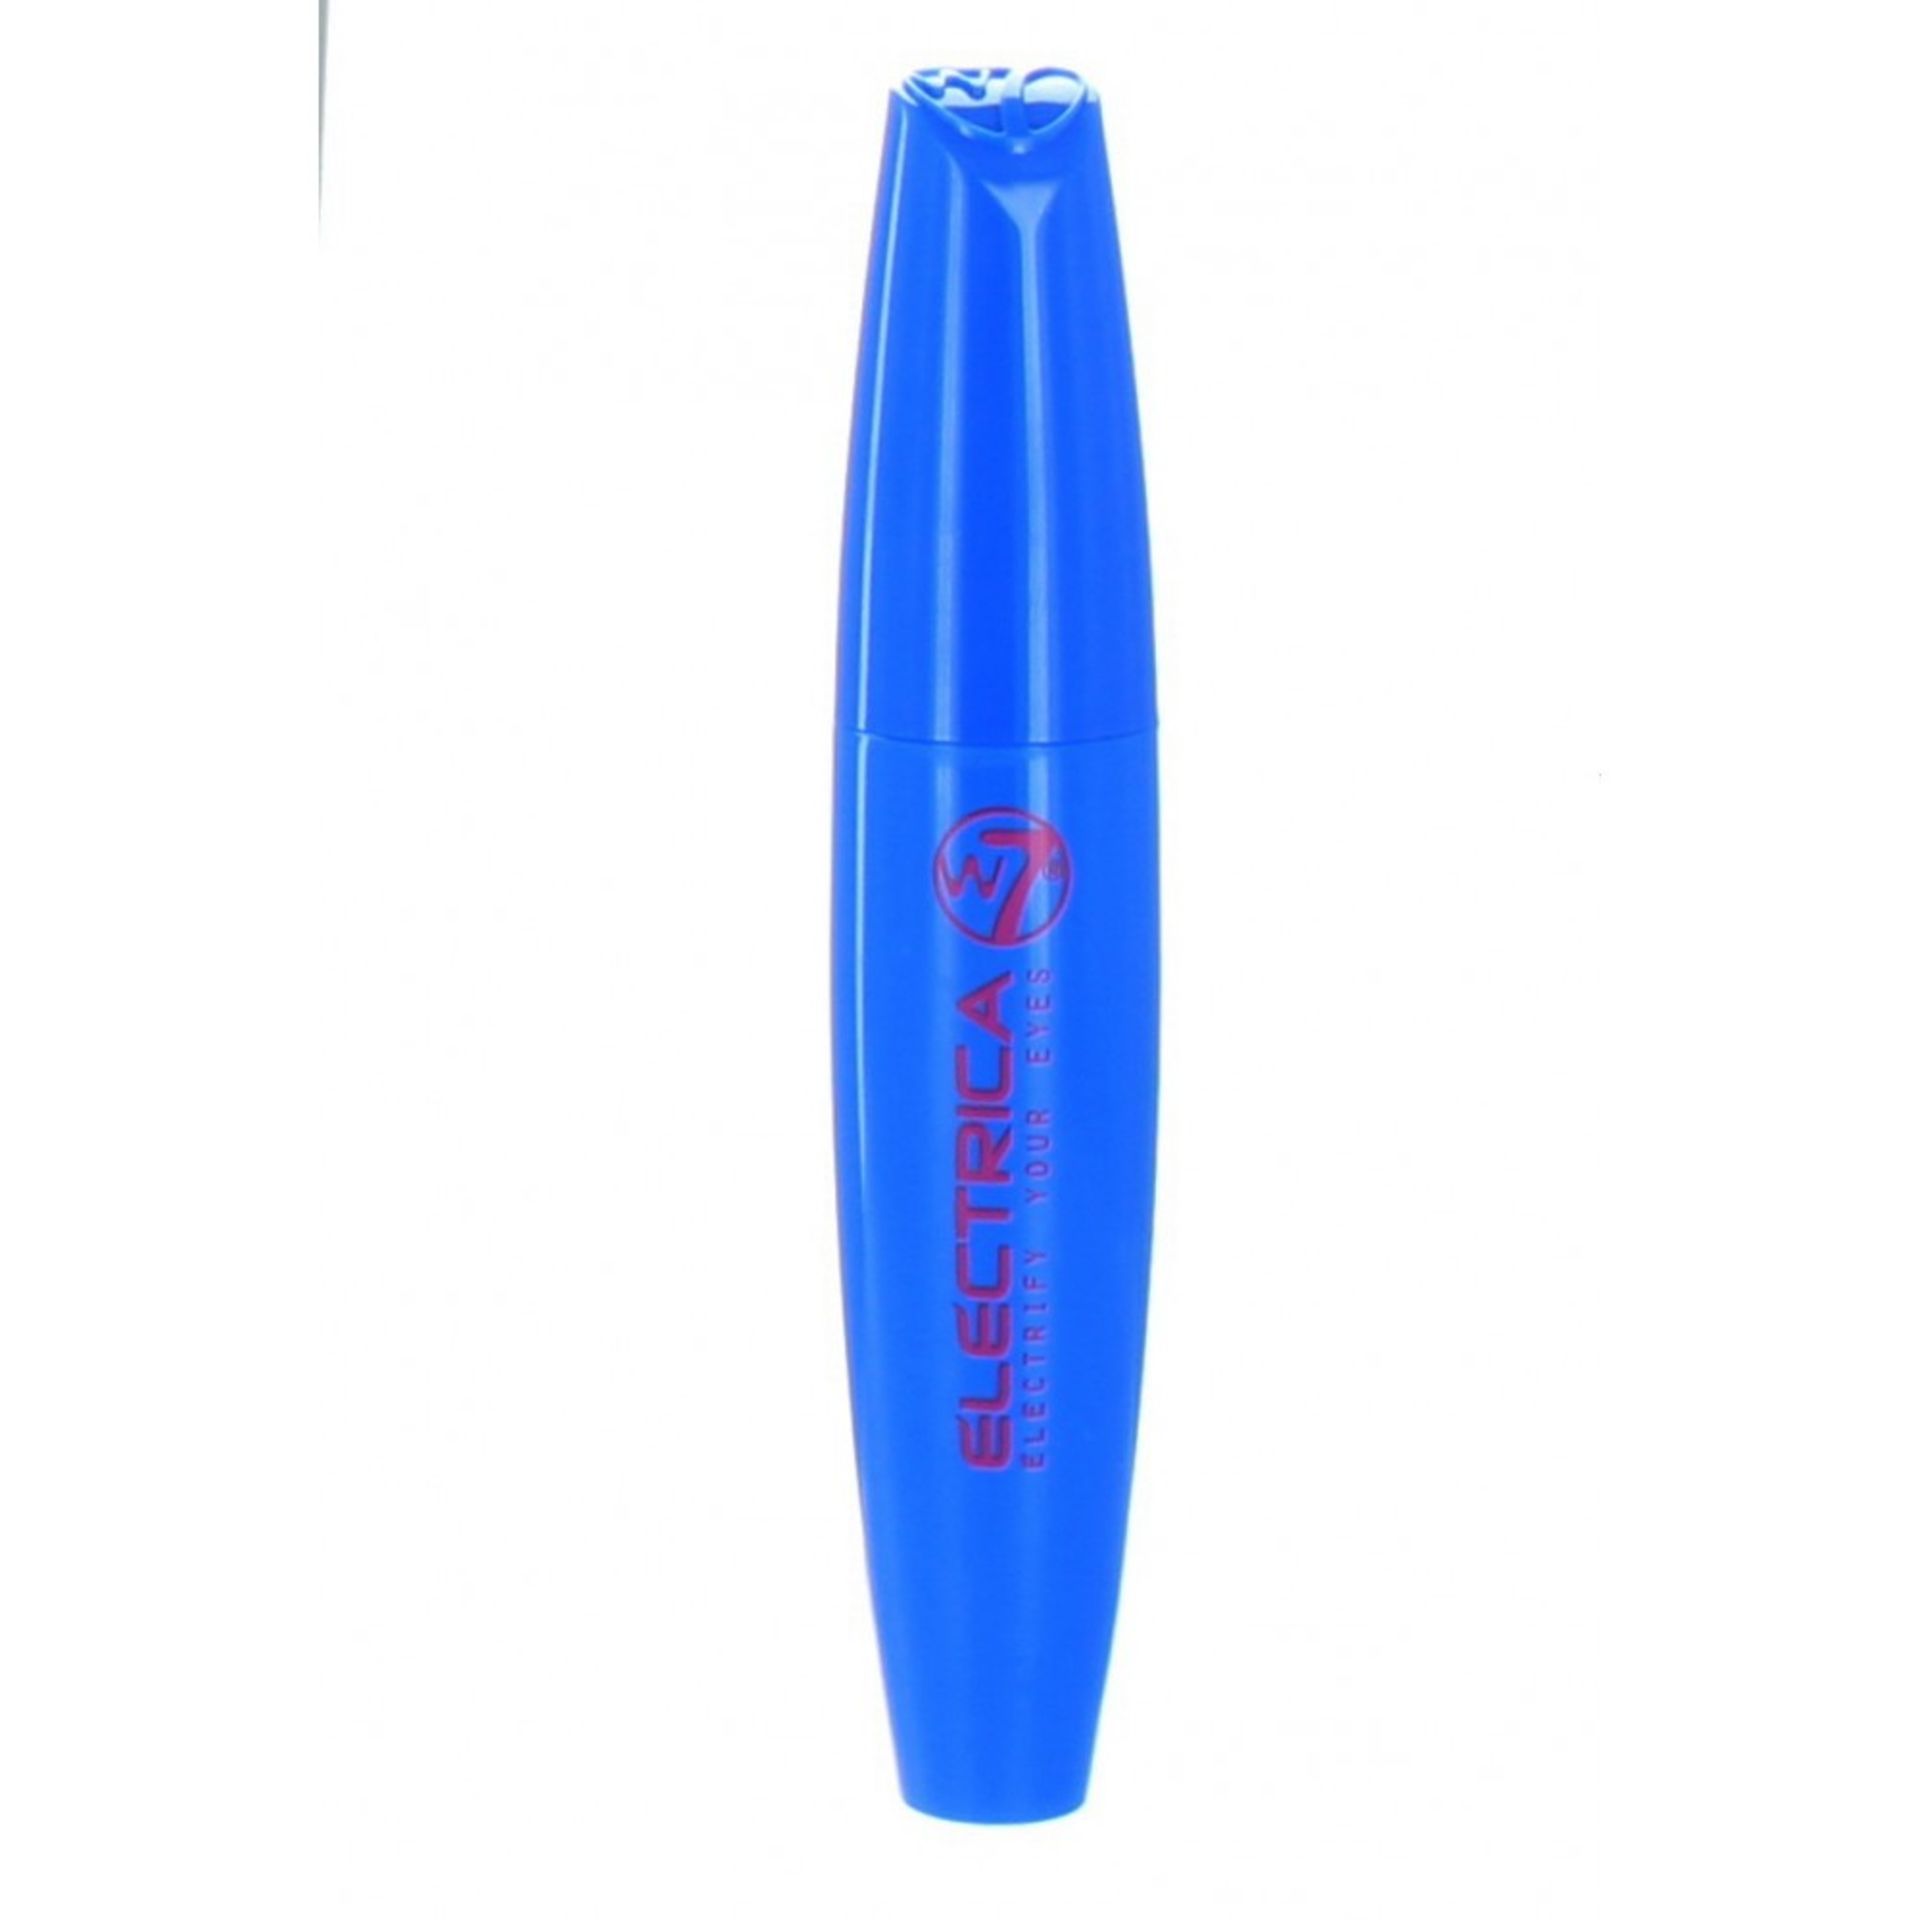 288 w7 Electrica Mascara – in Retail Displays – NO VAT - UK Delivery £15